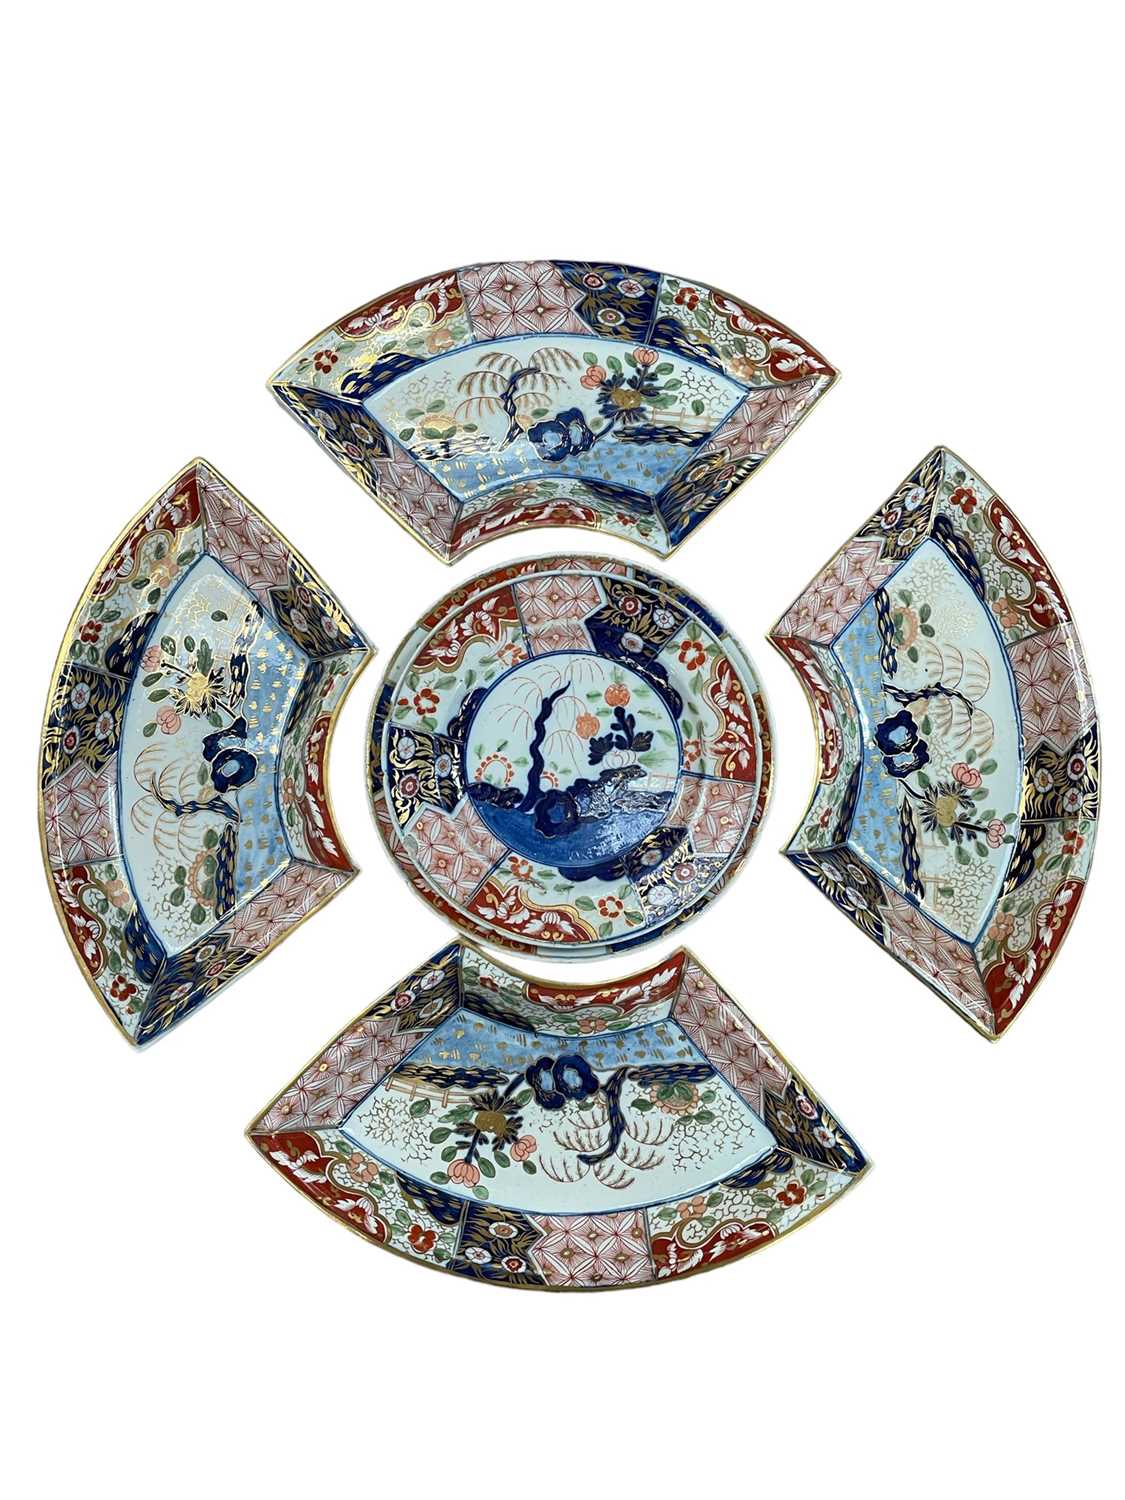 Lot 17 - Four 19th century Masons crescent shaped dishes in the Imari taste together with three other similar plates